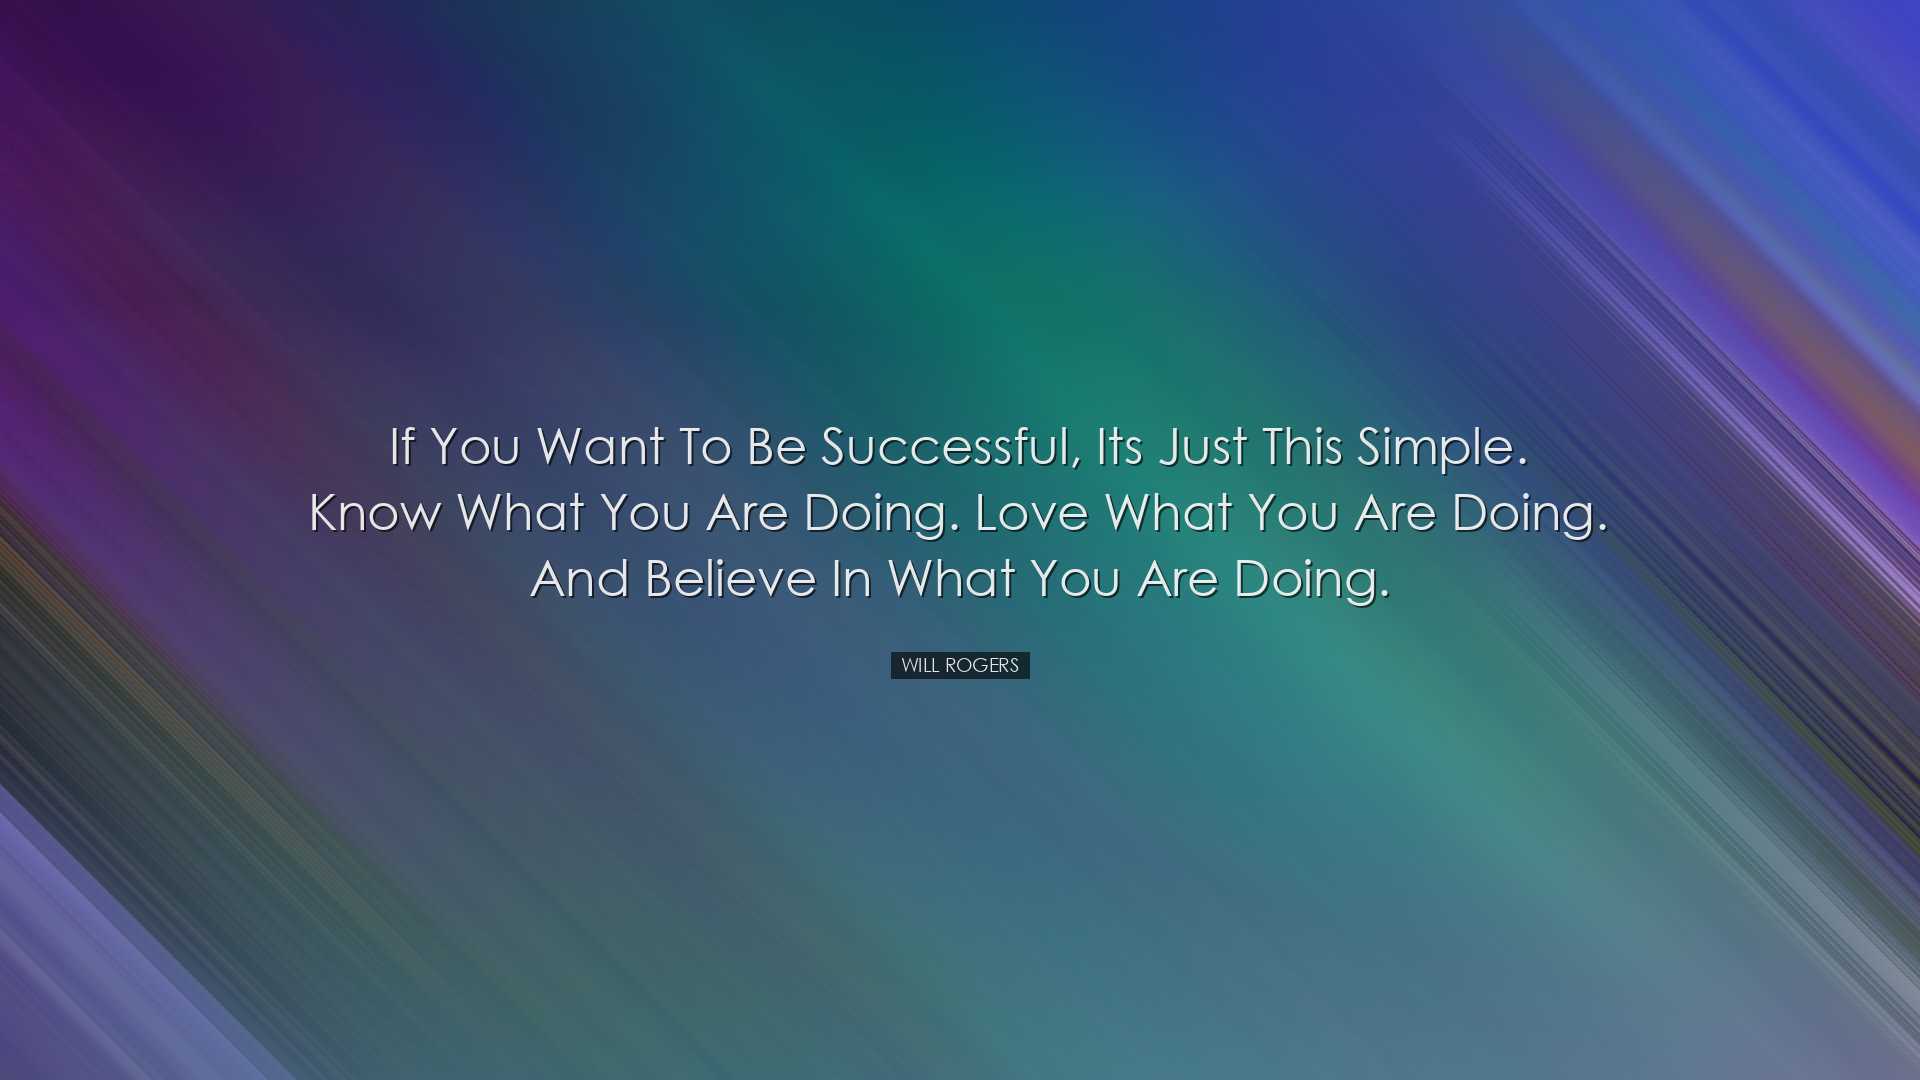 If you want to be successful, its just this simple. Know what you